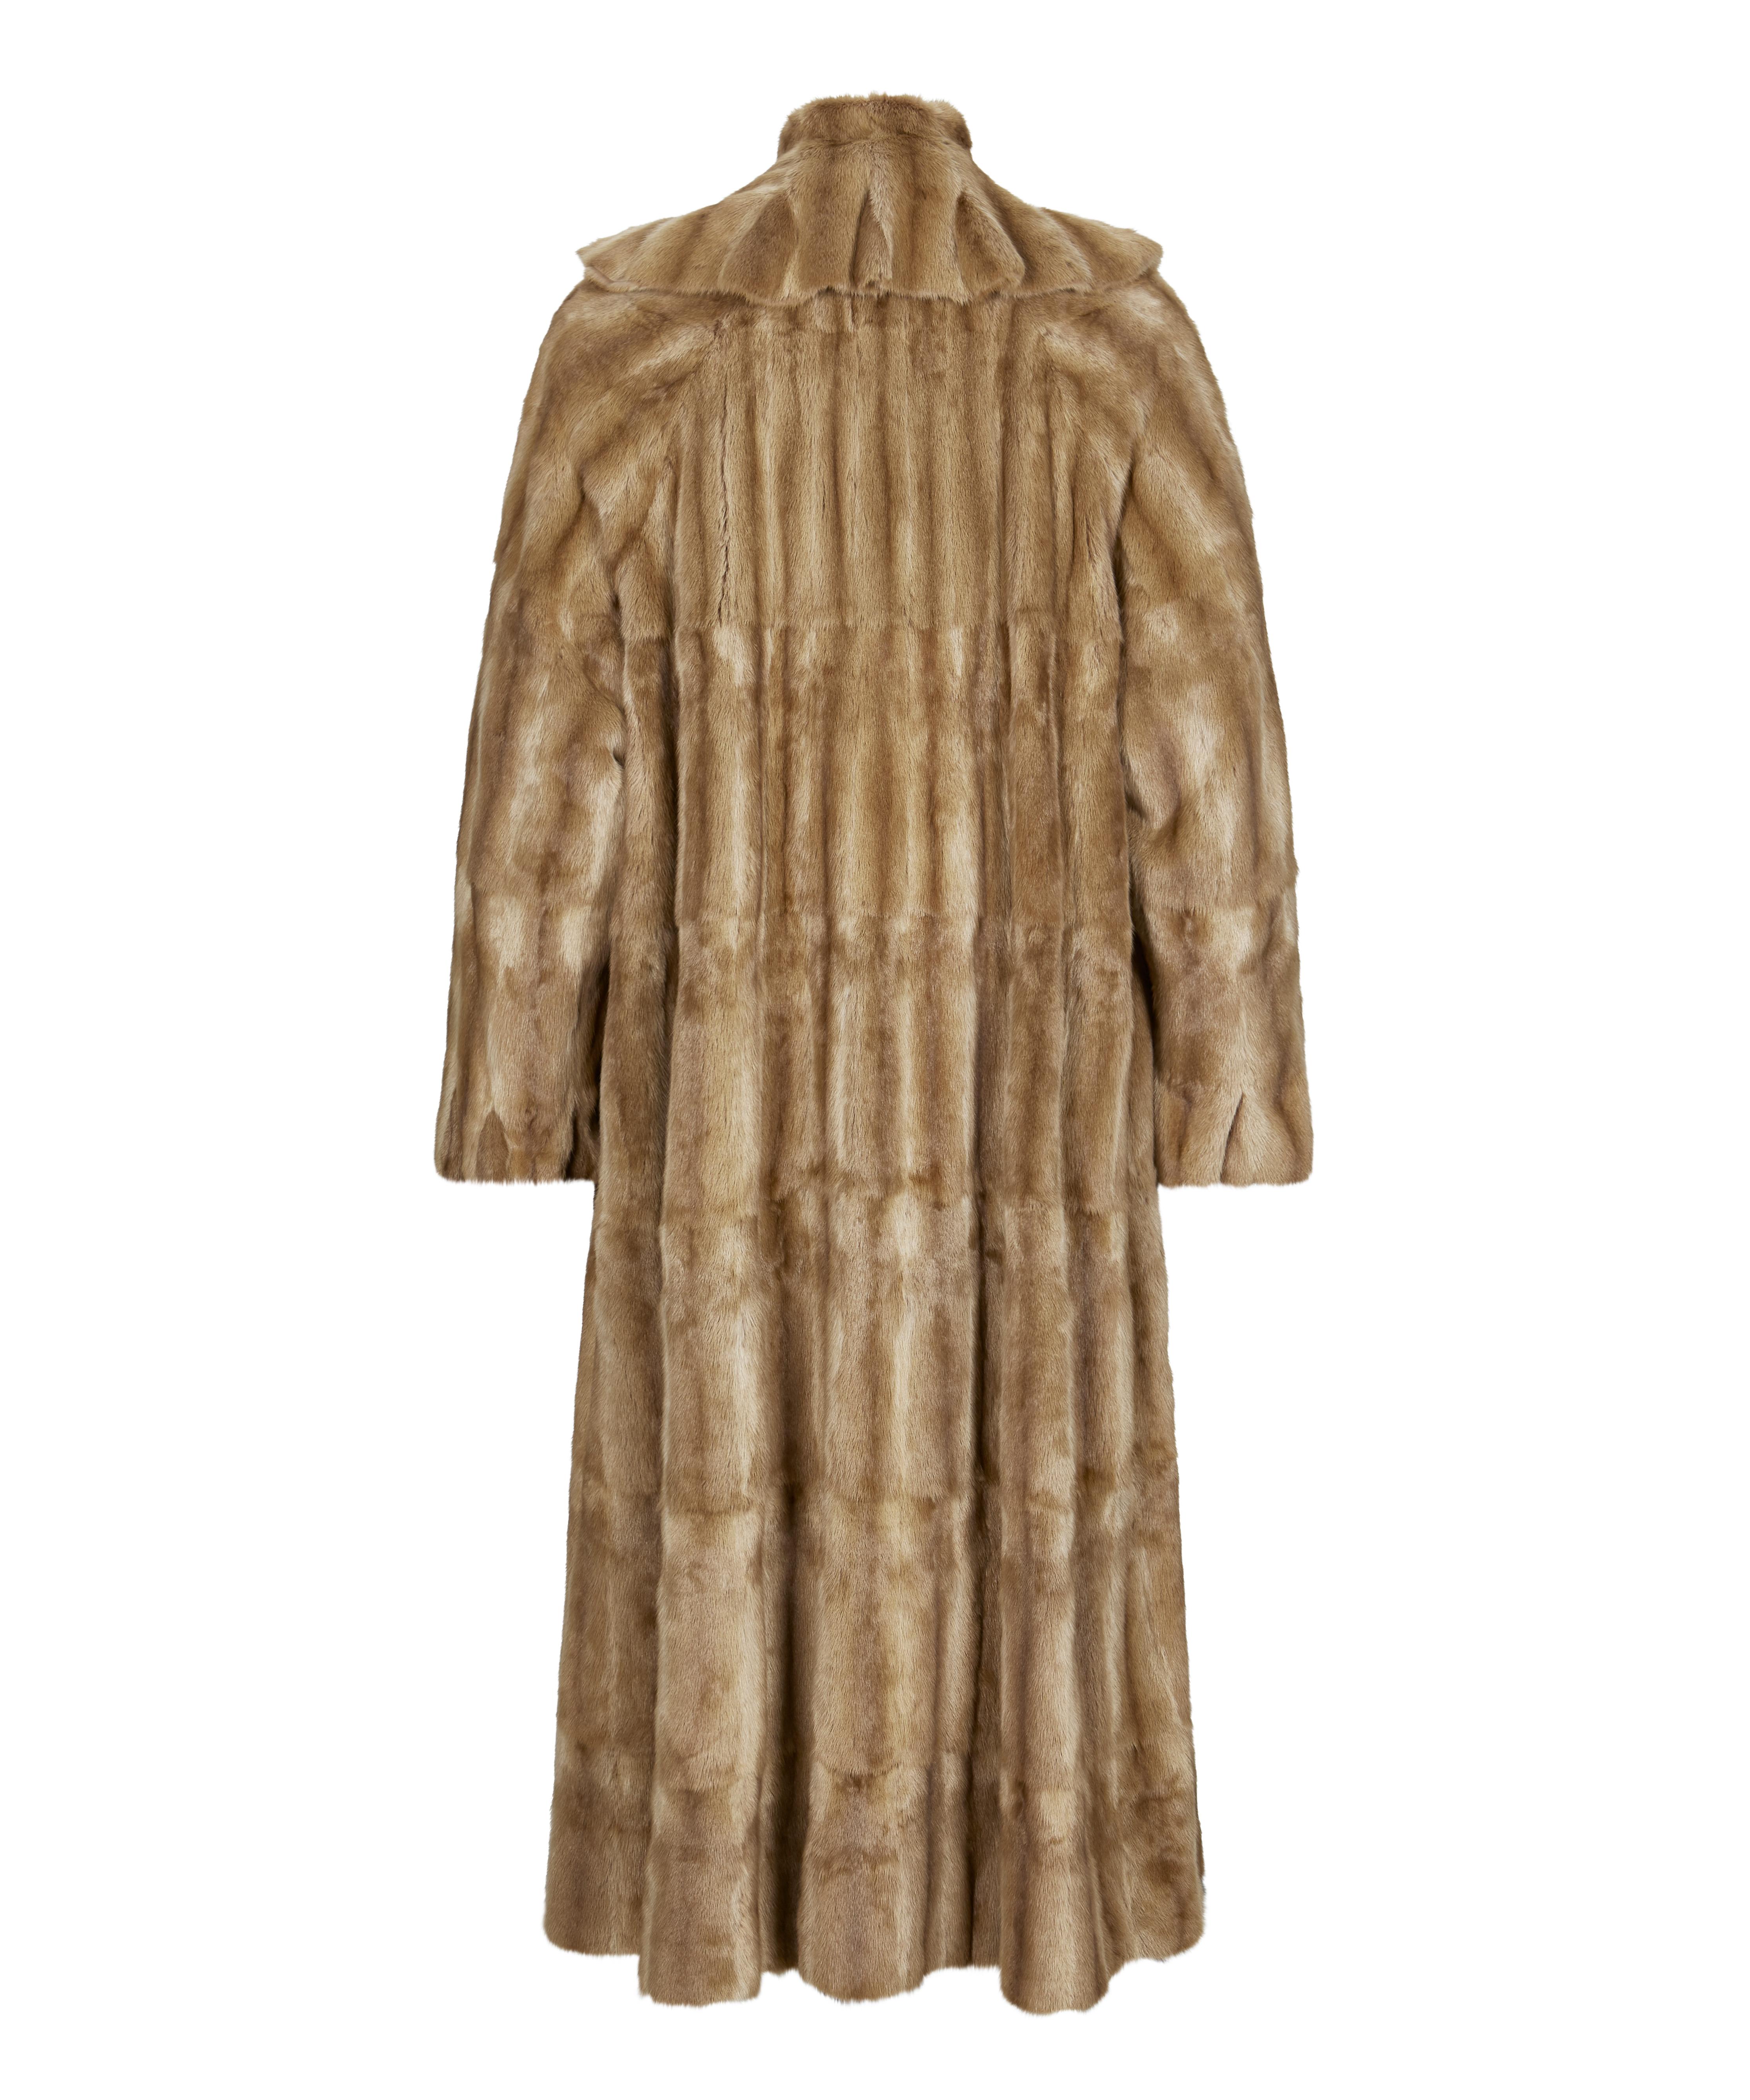 A classic light brown ermine fur coat with ruffle detail along the collar. Light brown ermine fur. Fur hook closure. Champagne colour silk Fendi logo lining. Fendi insignia throughout the lining. Long sleeve. 100% Ermine fur. Made in Italy. Color: